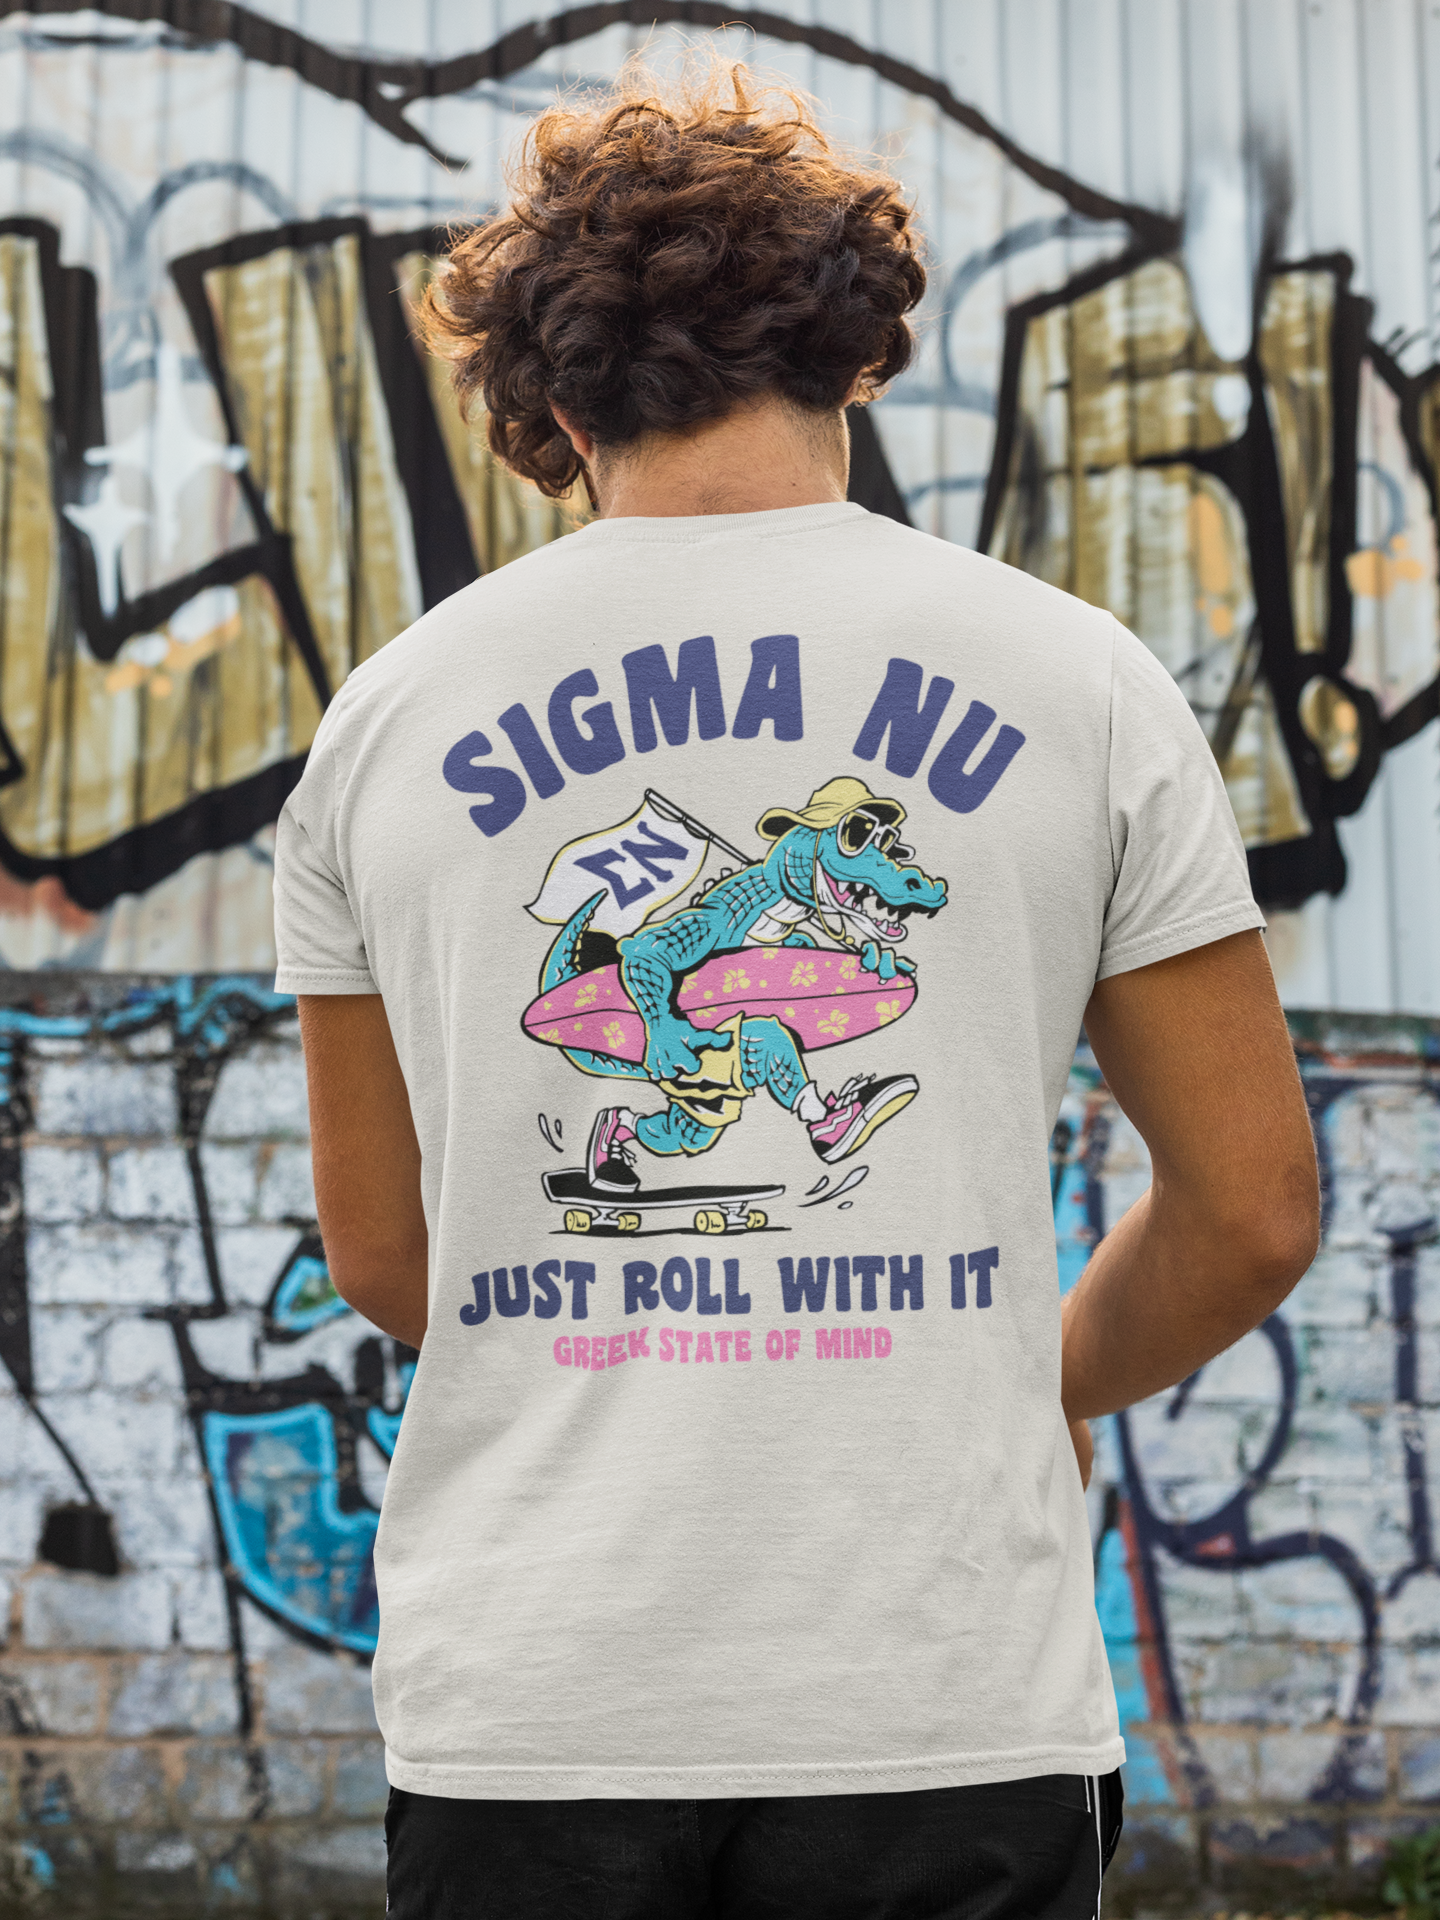 White Sigma Nu Graphic T-Shirt | Alligator Skater | Sigma Nu Clothing, Apparel and Merchandise model 